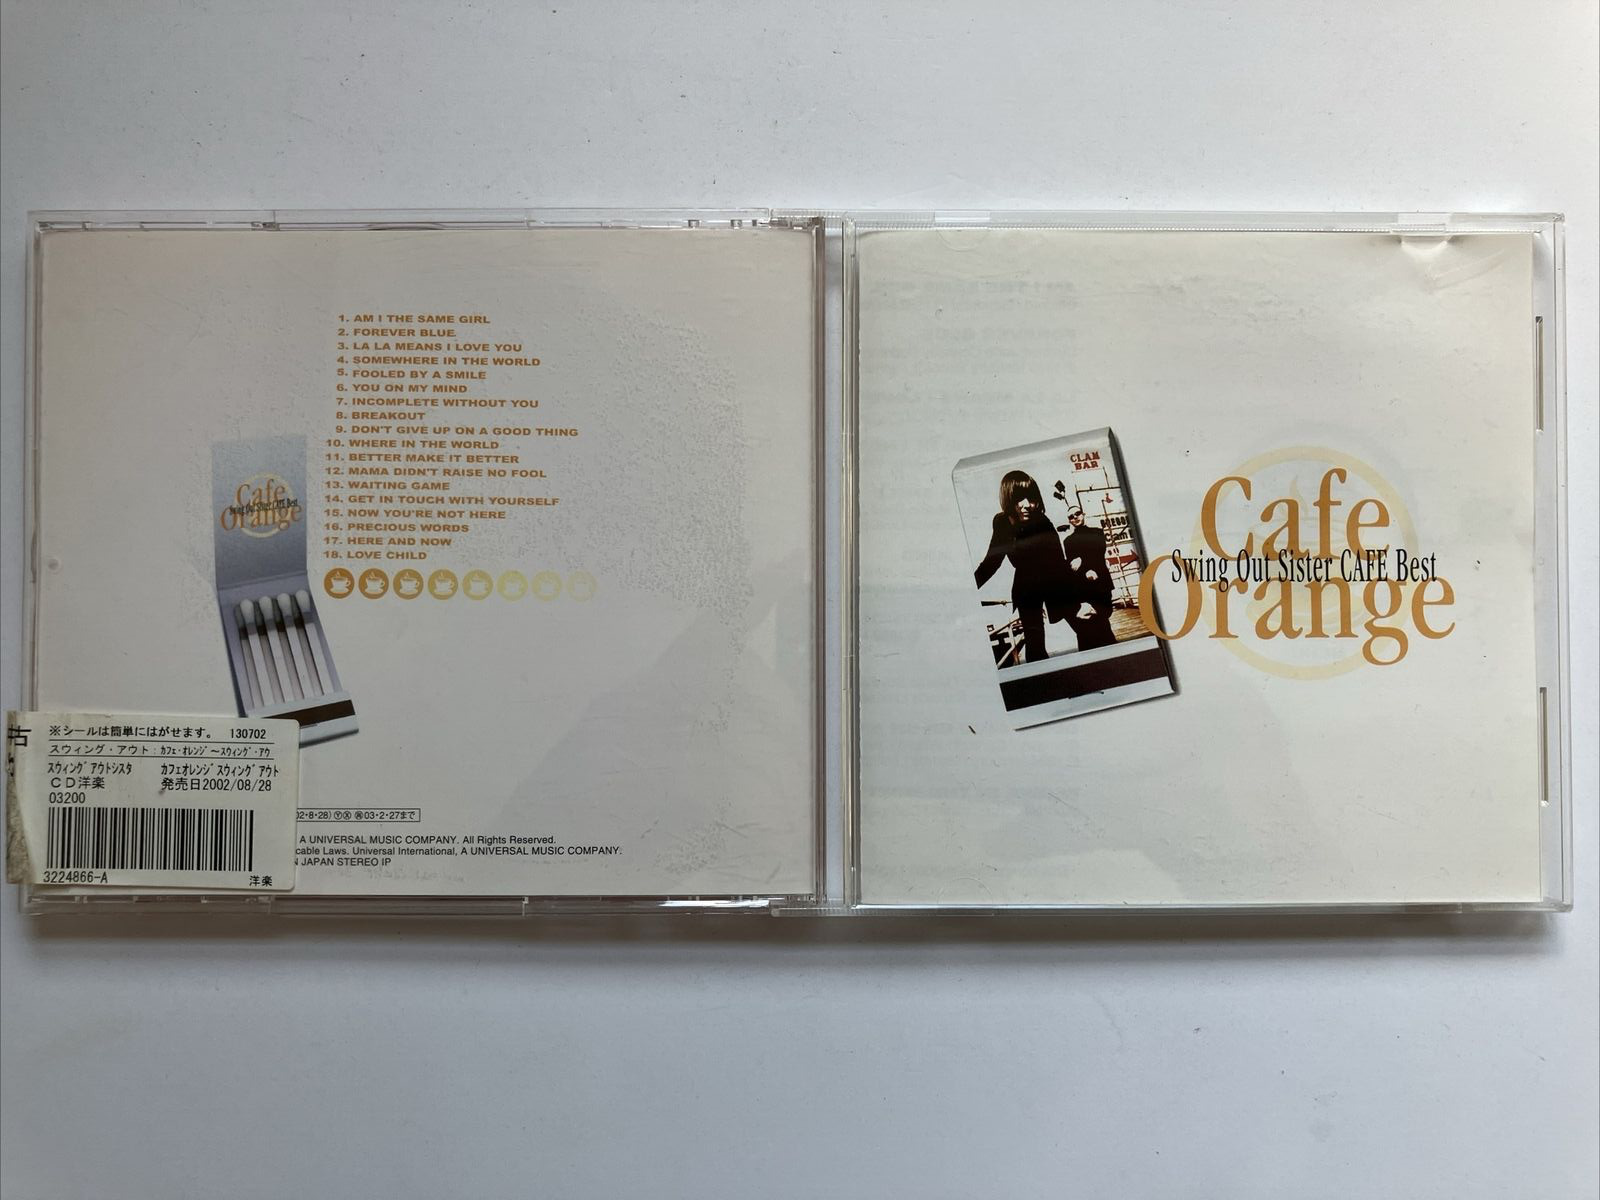 Swing Out Sister CD - Cafe Orange (Cafe Best) Very Good Condition - Rare